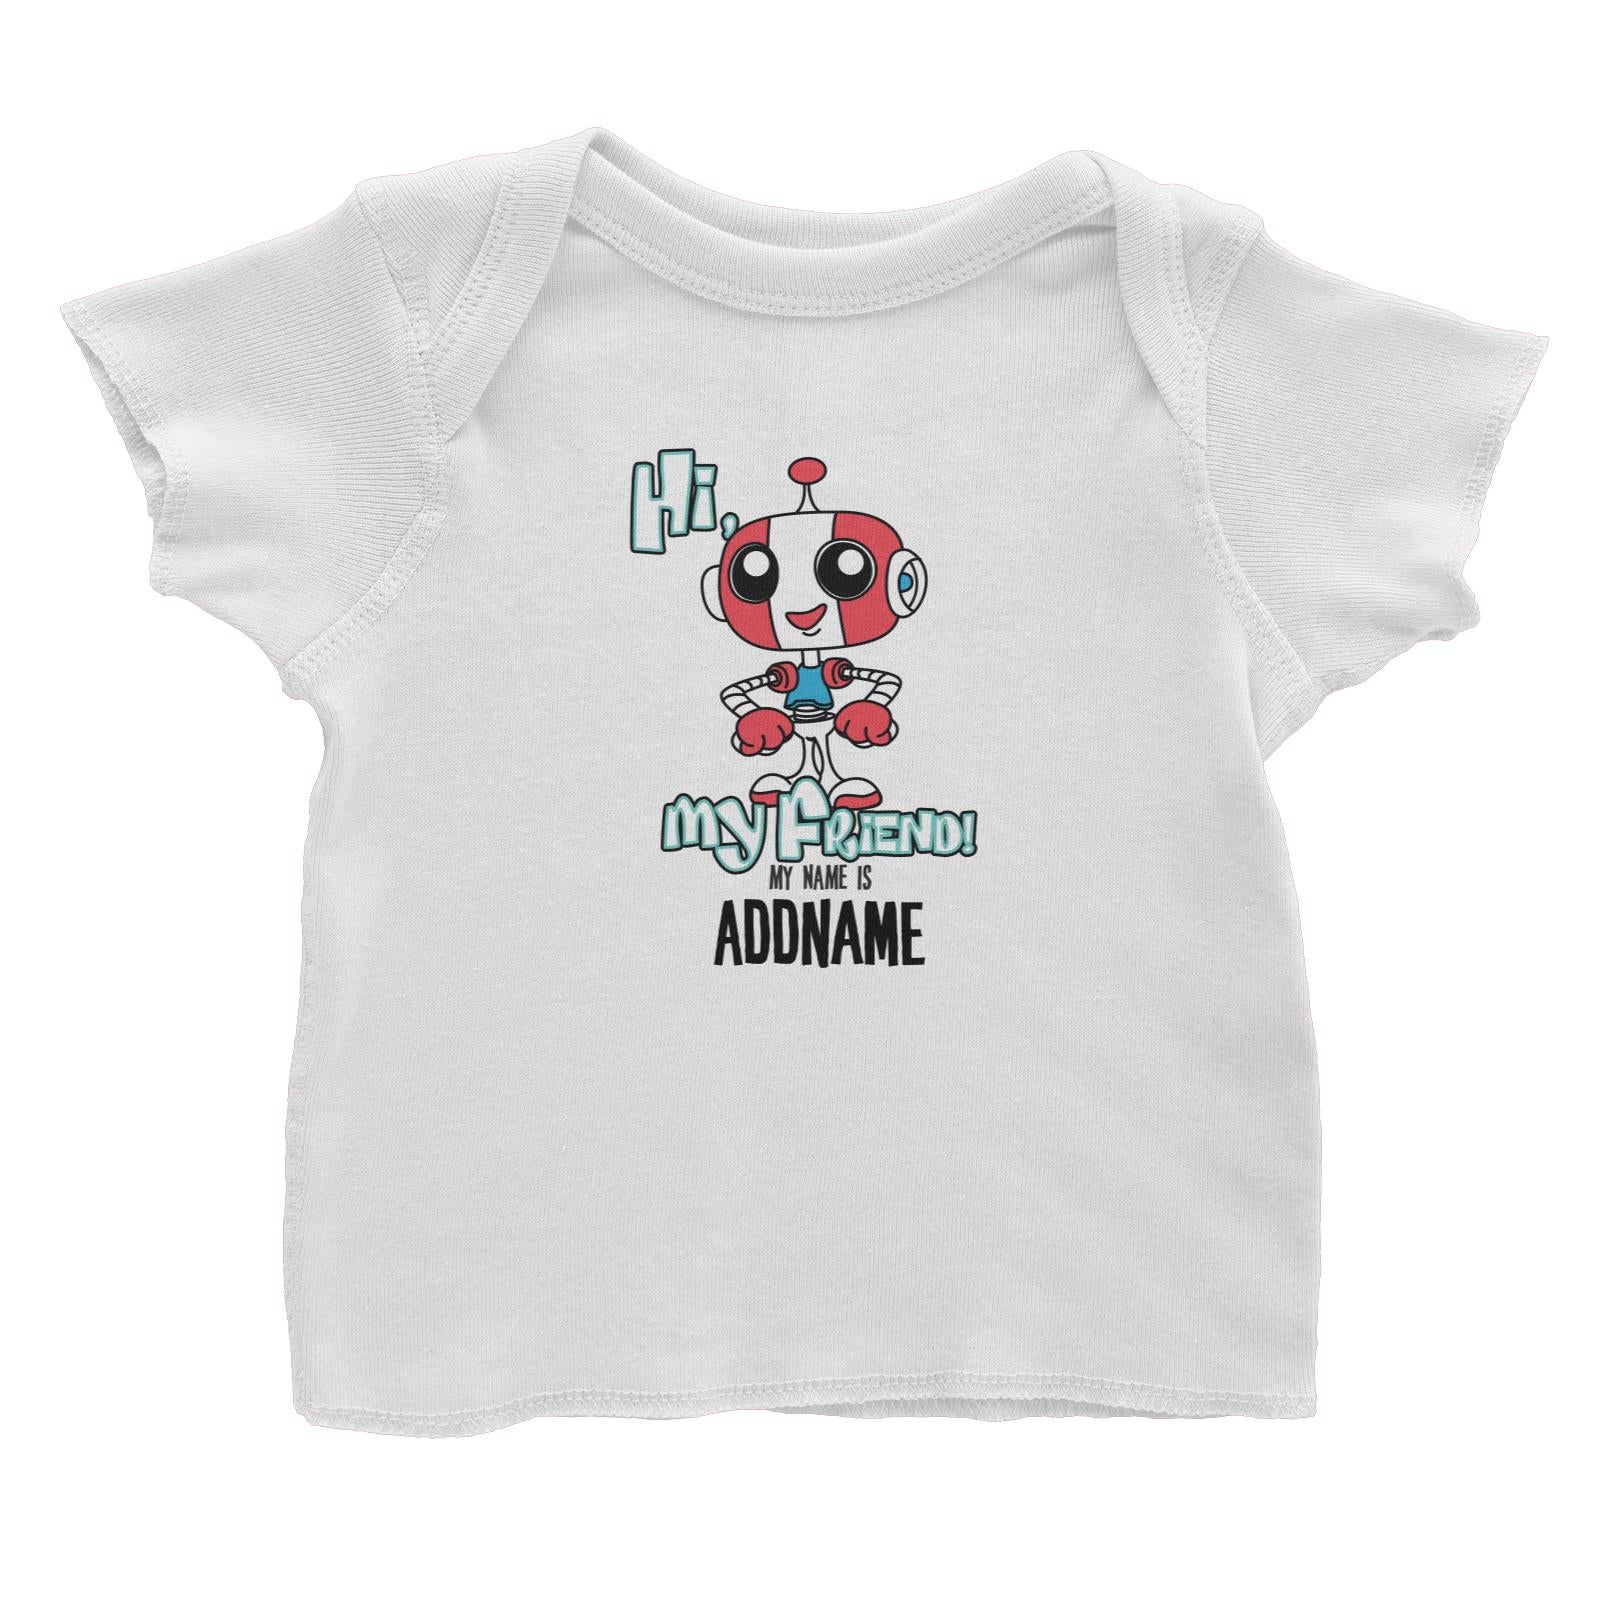 Cool Vibrant Series Robot Hi My Name is Addname Baby T-Shirt